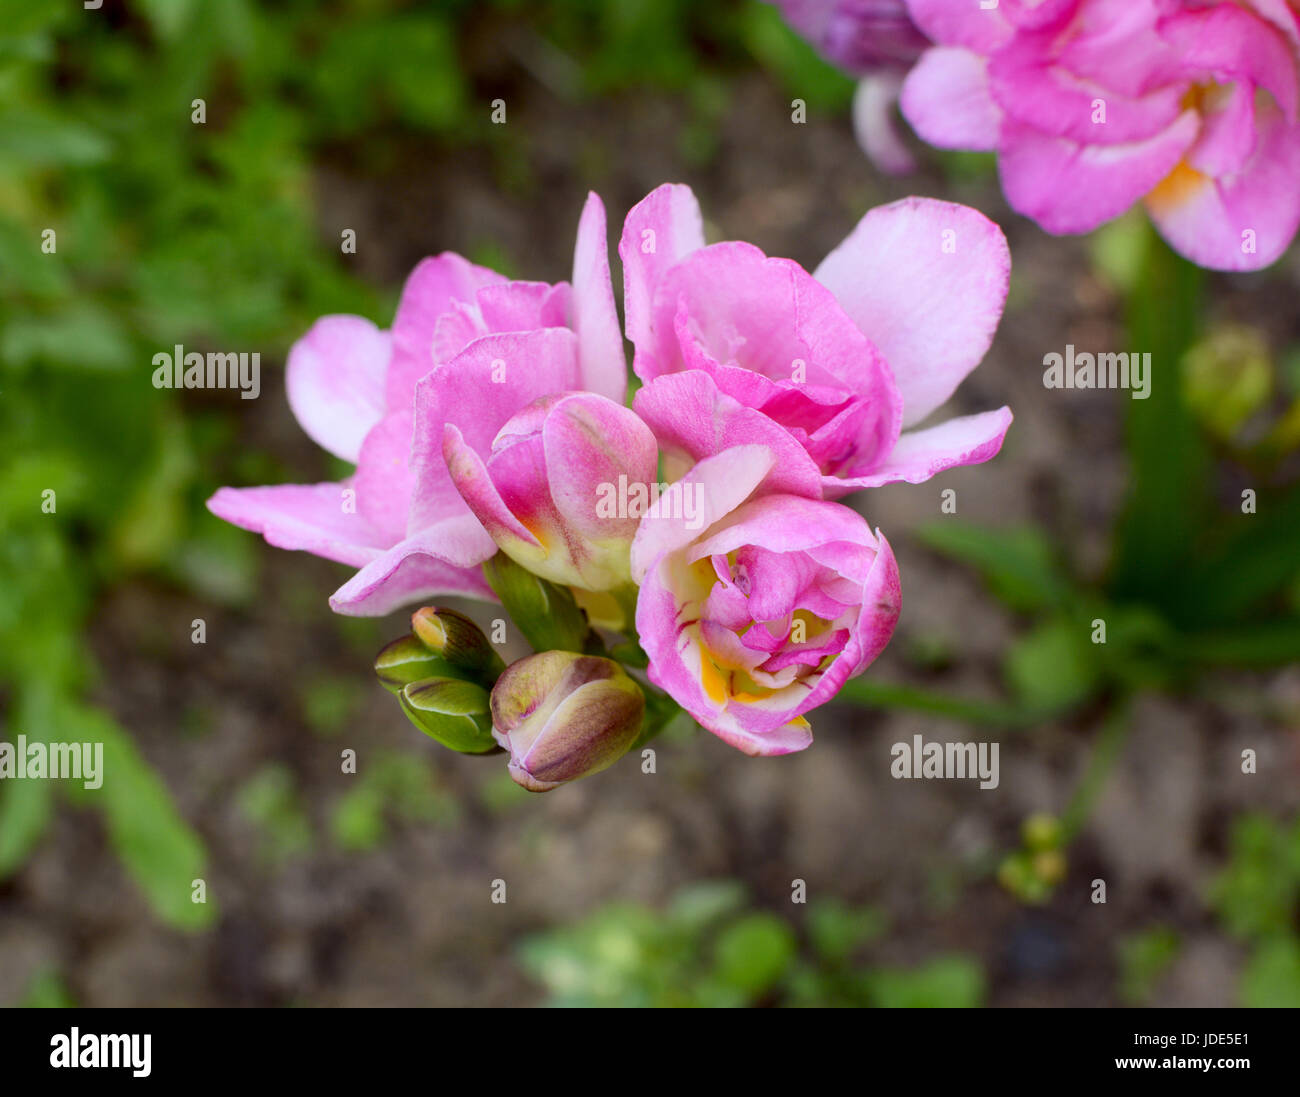 Flower head of a pink freesia with open double blooms and unopened buds, growing in a garden Stock Photo